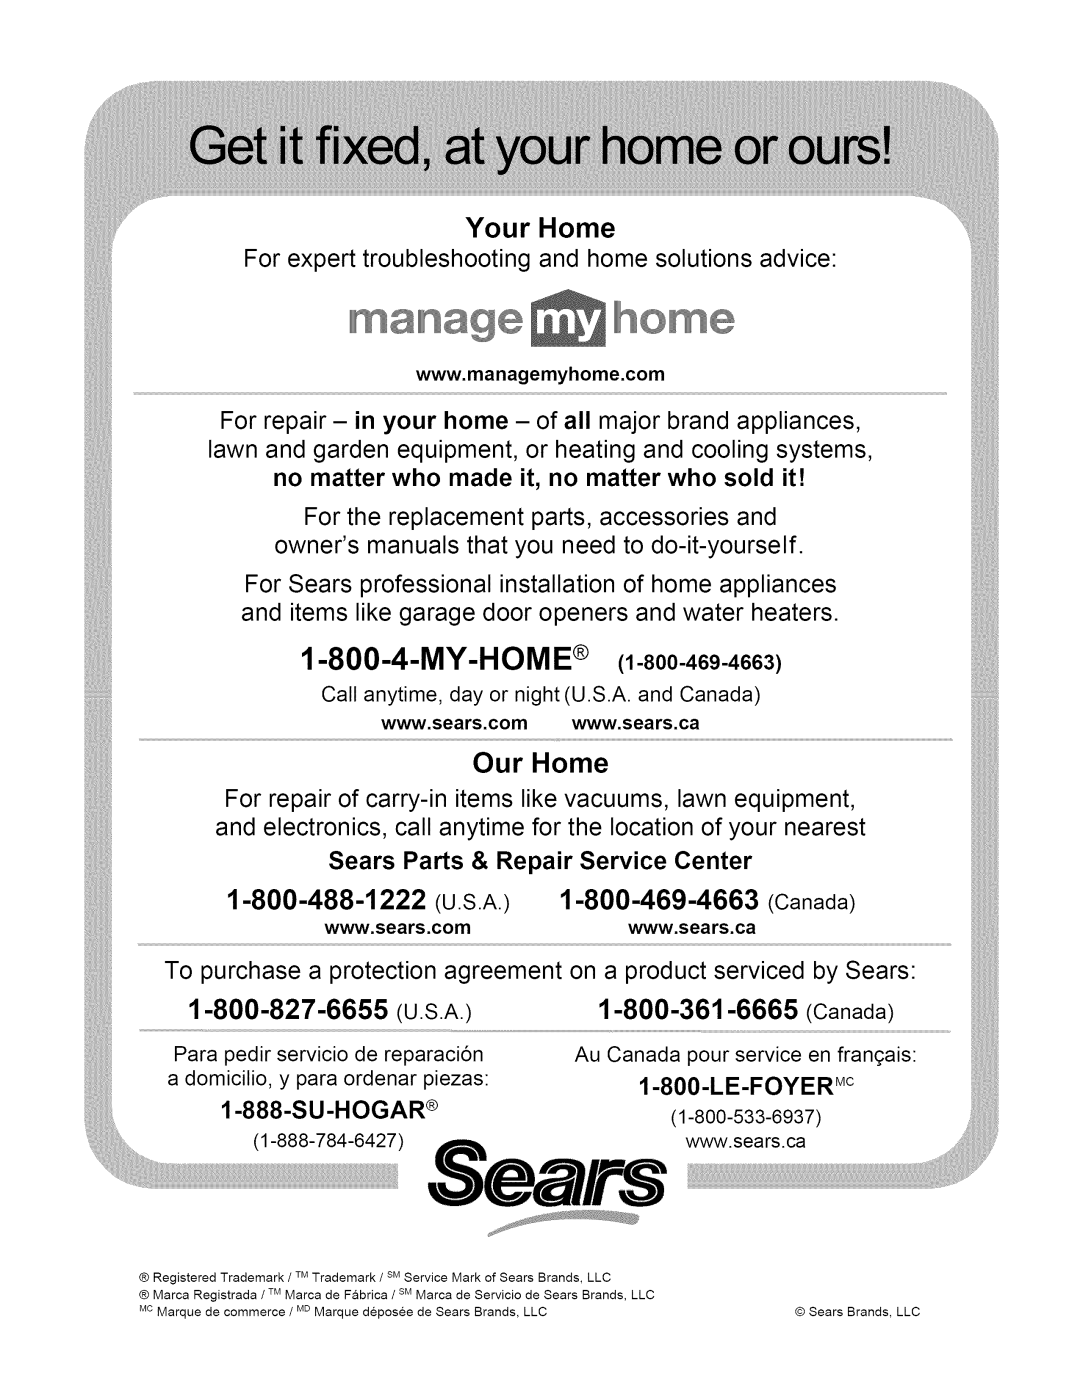 Craftsman 33029 My-Home, no matter who made it, no matter who sold it, Sears Parts & Repair Service Center, Your Home 